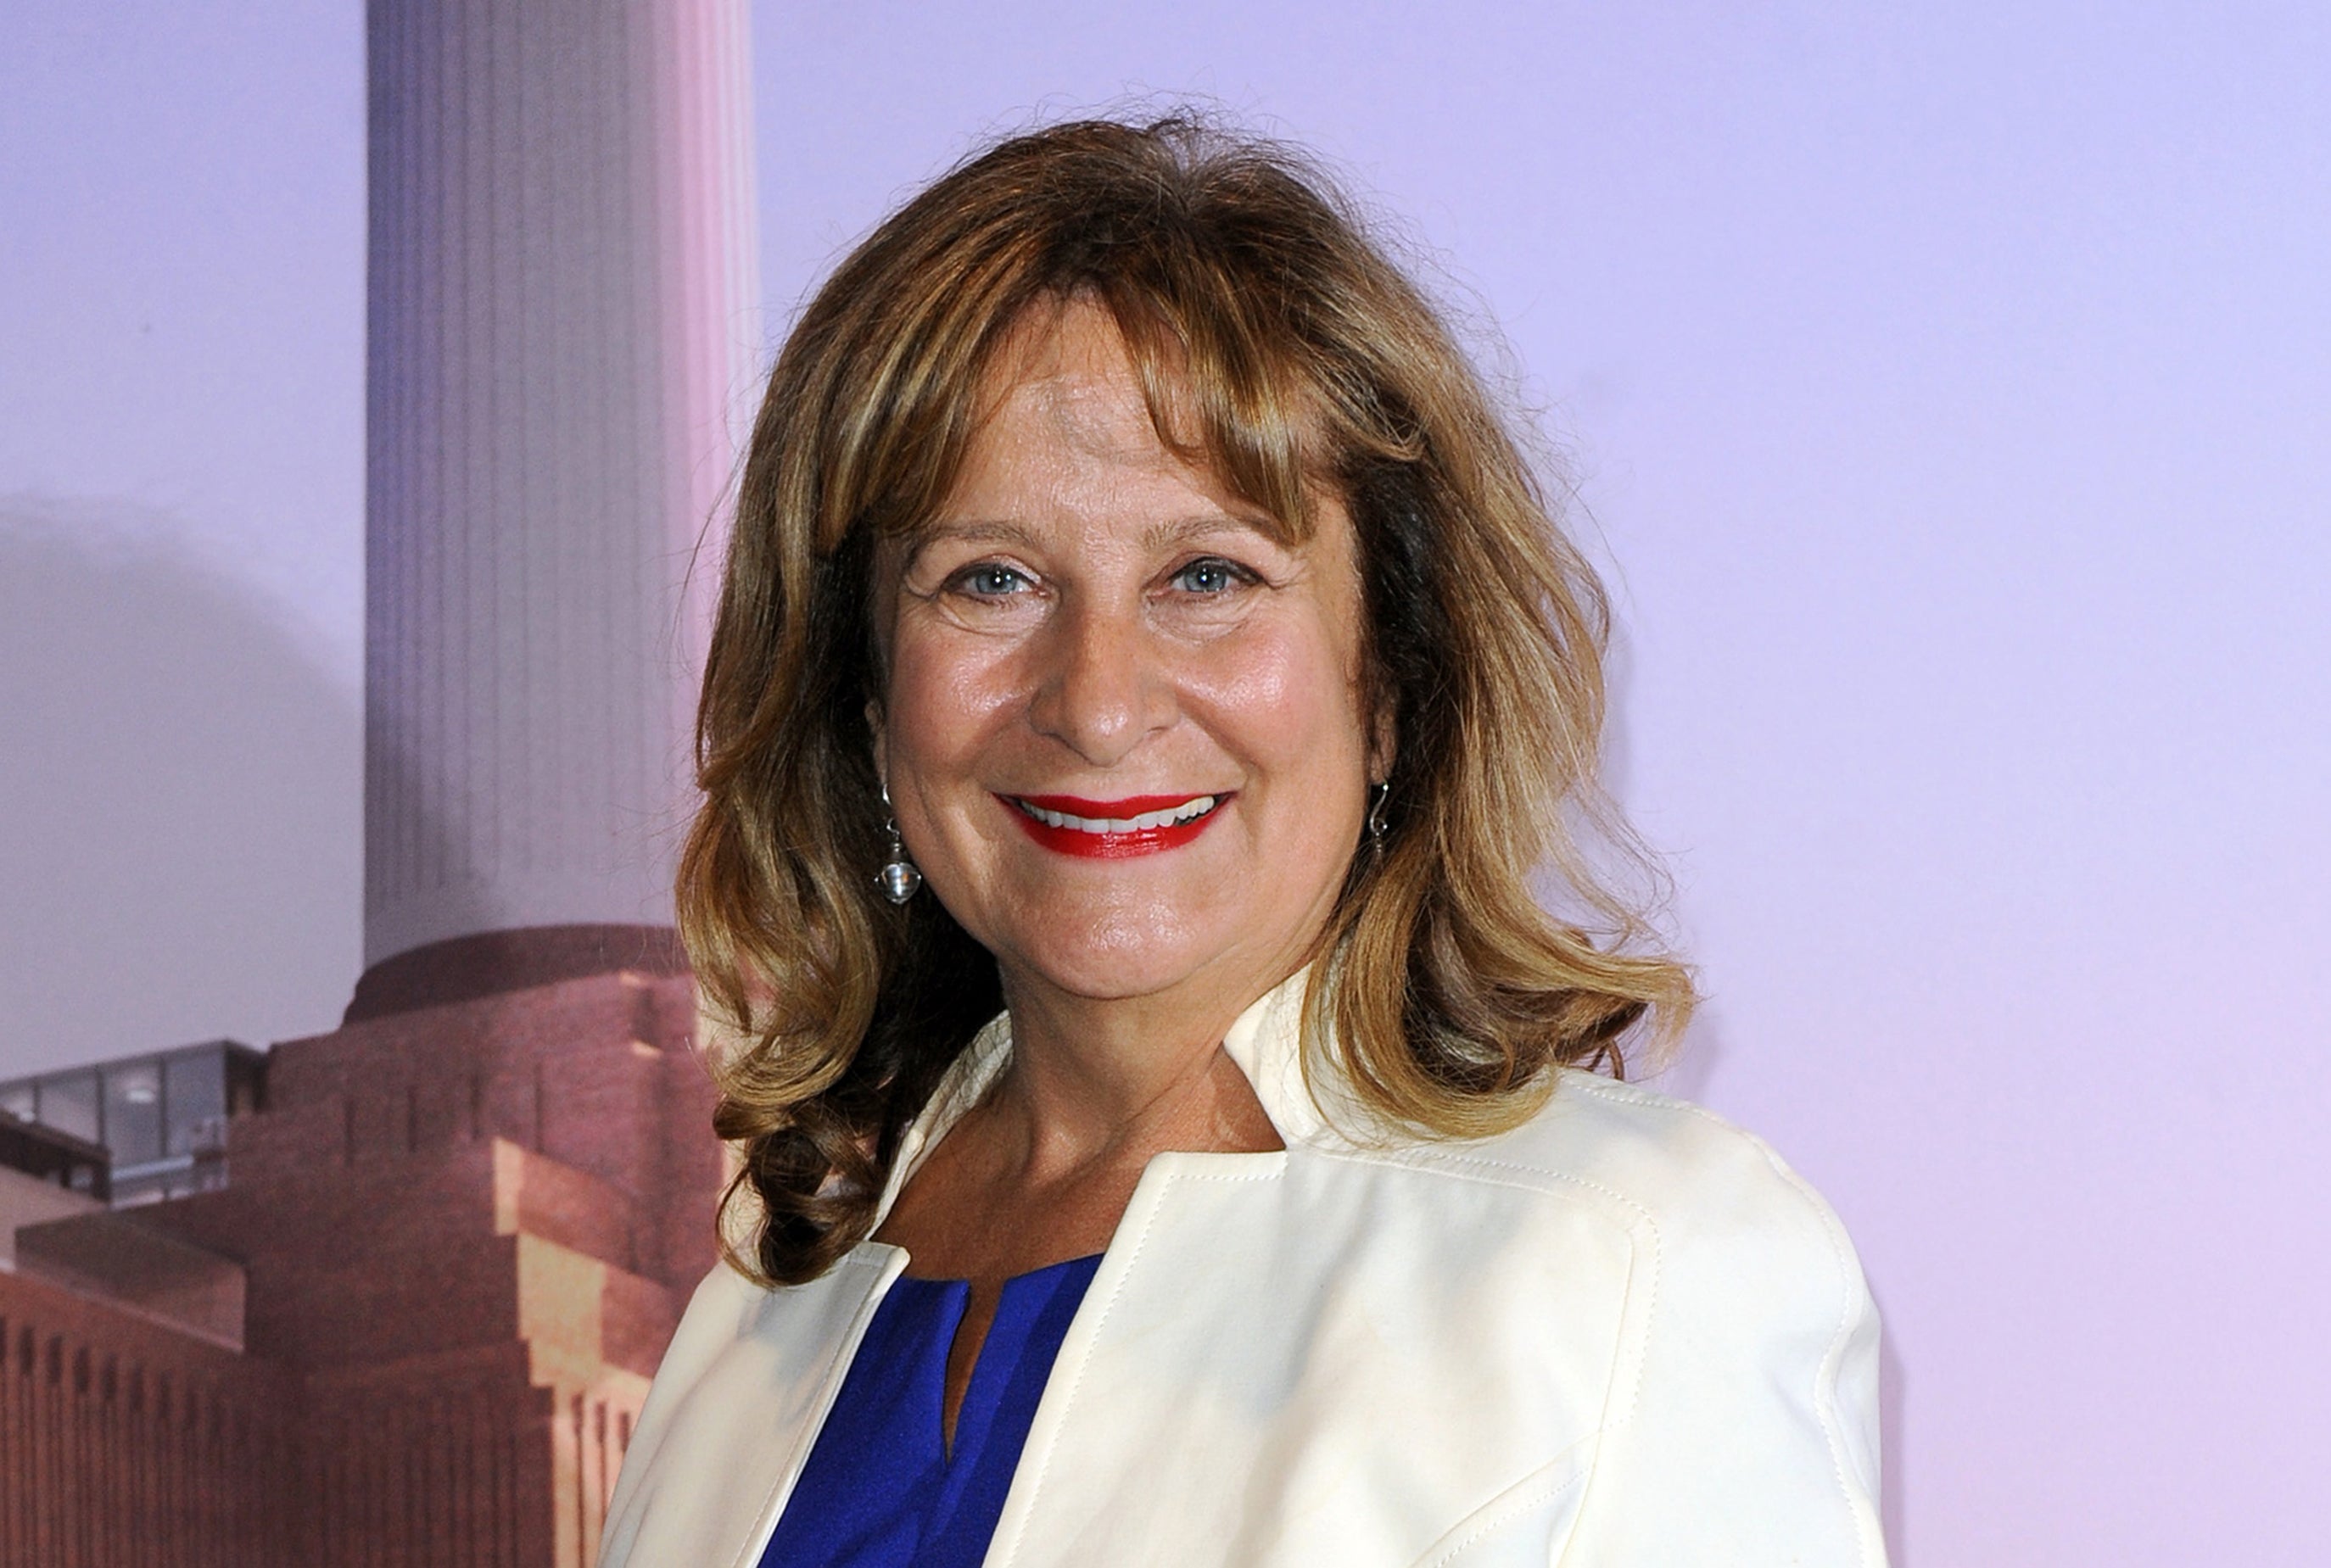 Baroness Helena Kennedy who has been appointed to the Order of the Thistle